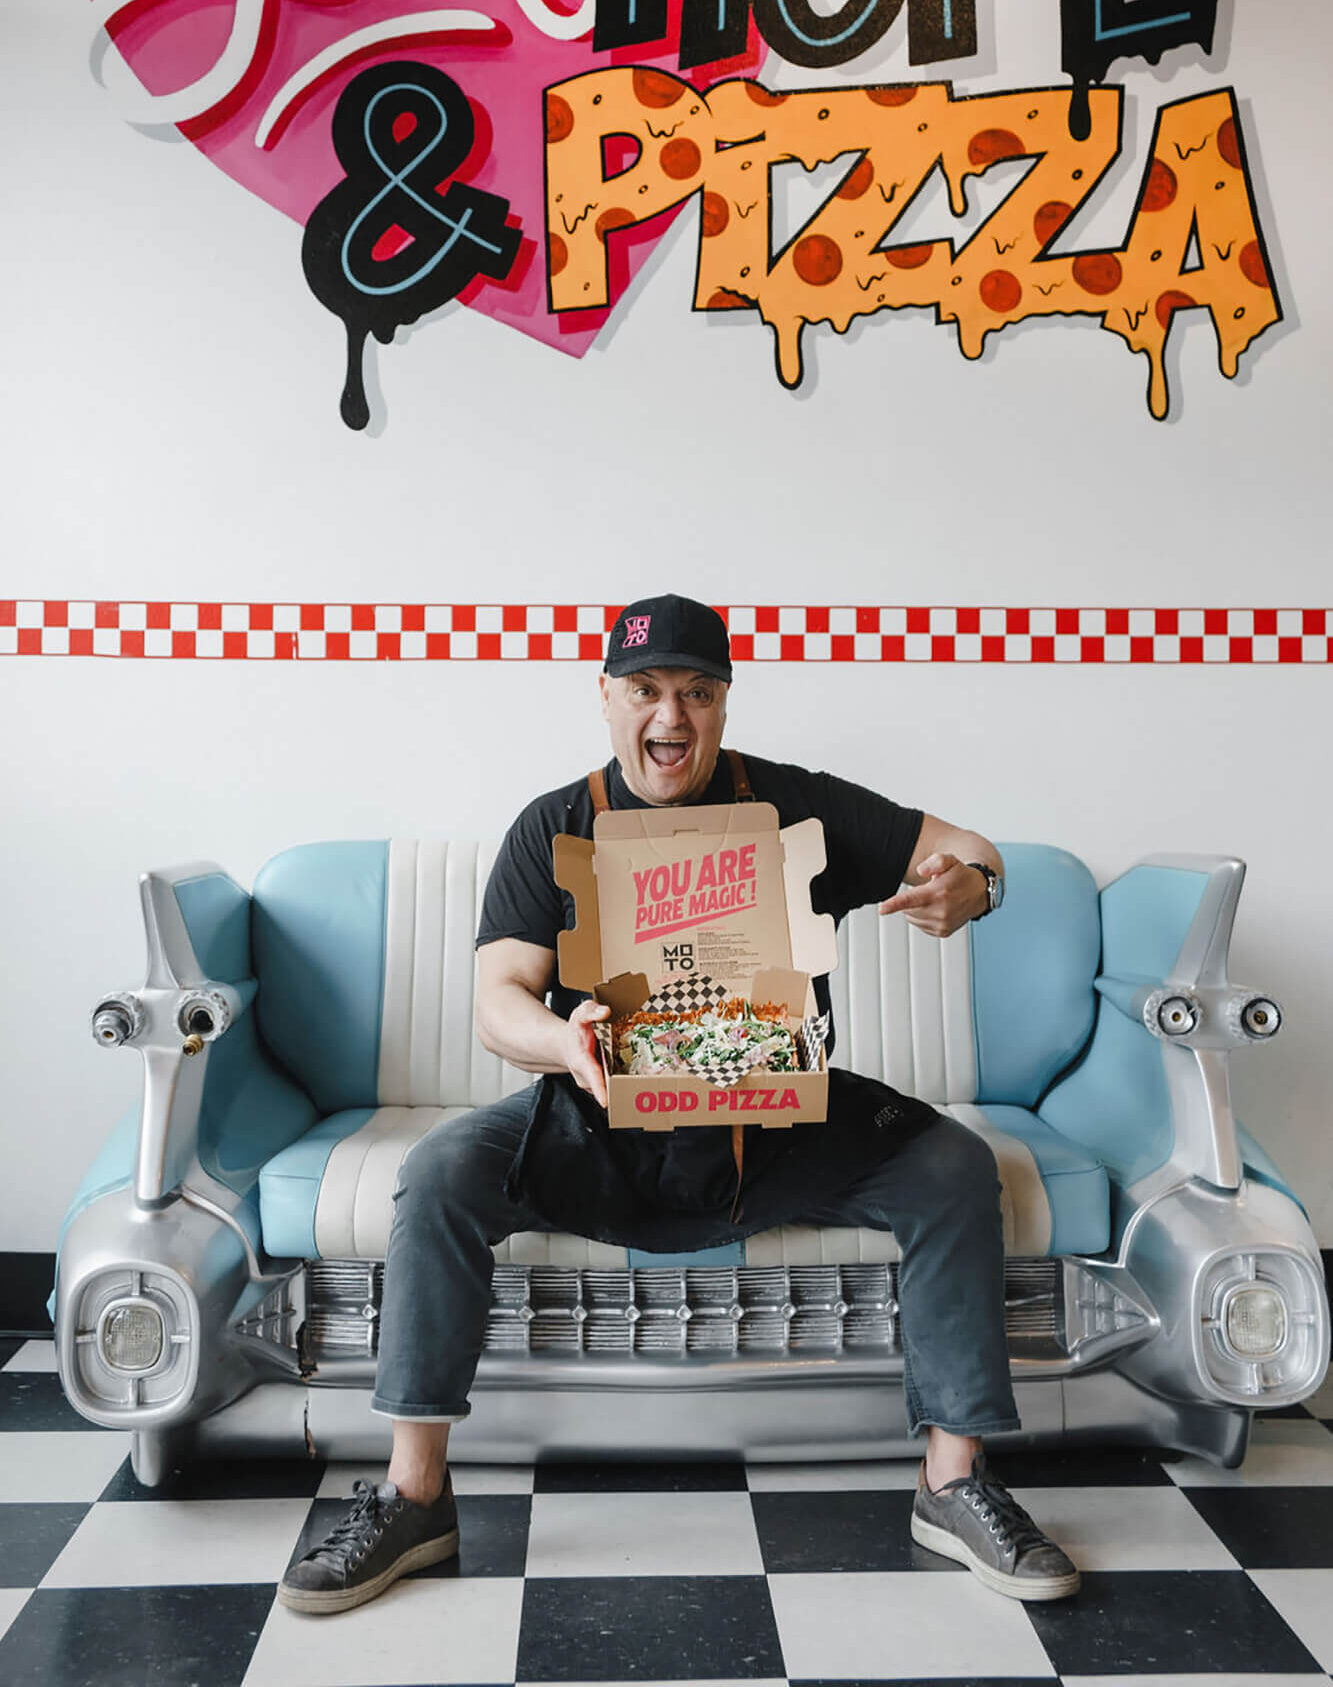 Lee Sitting on Couch Holding a Box of Pizza